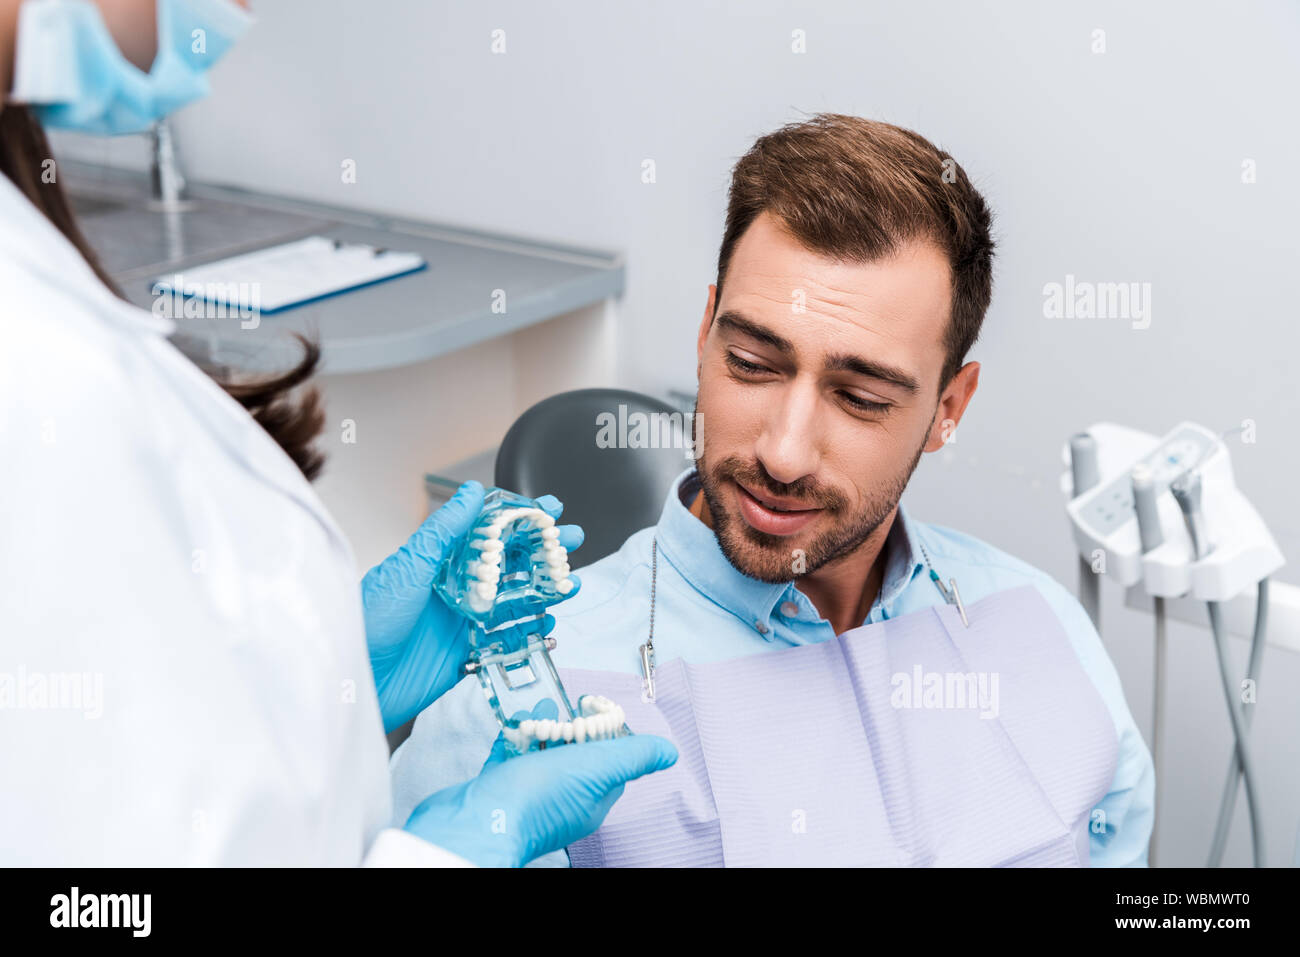 cropped view of dentist in medial mask and latex gloves holding teeth model near handsome patient Stock Photo